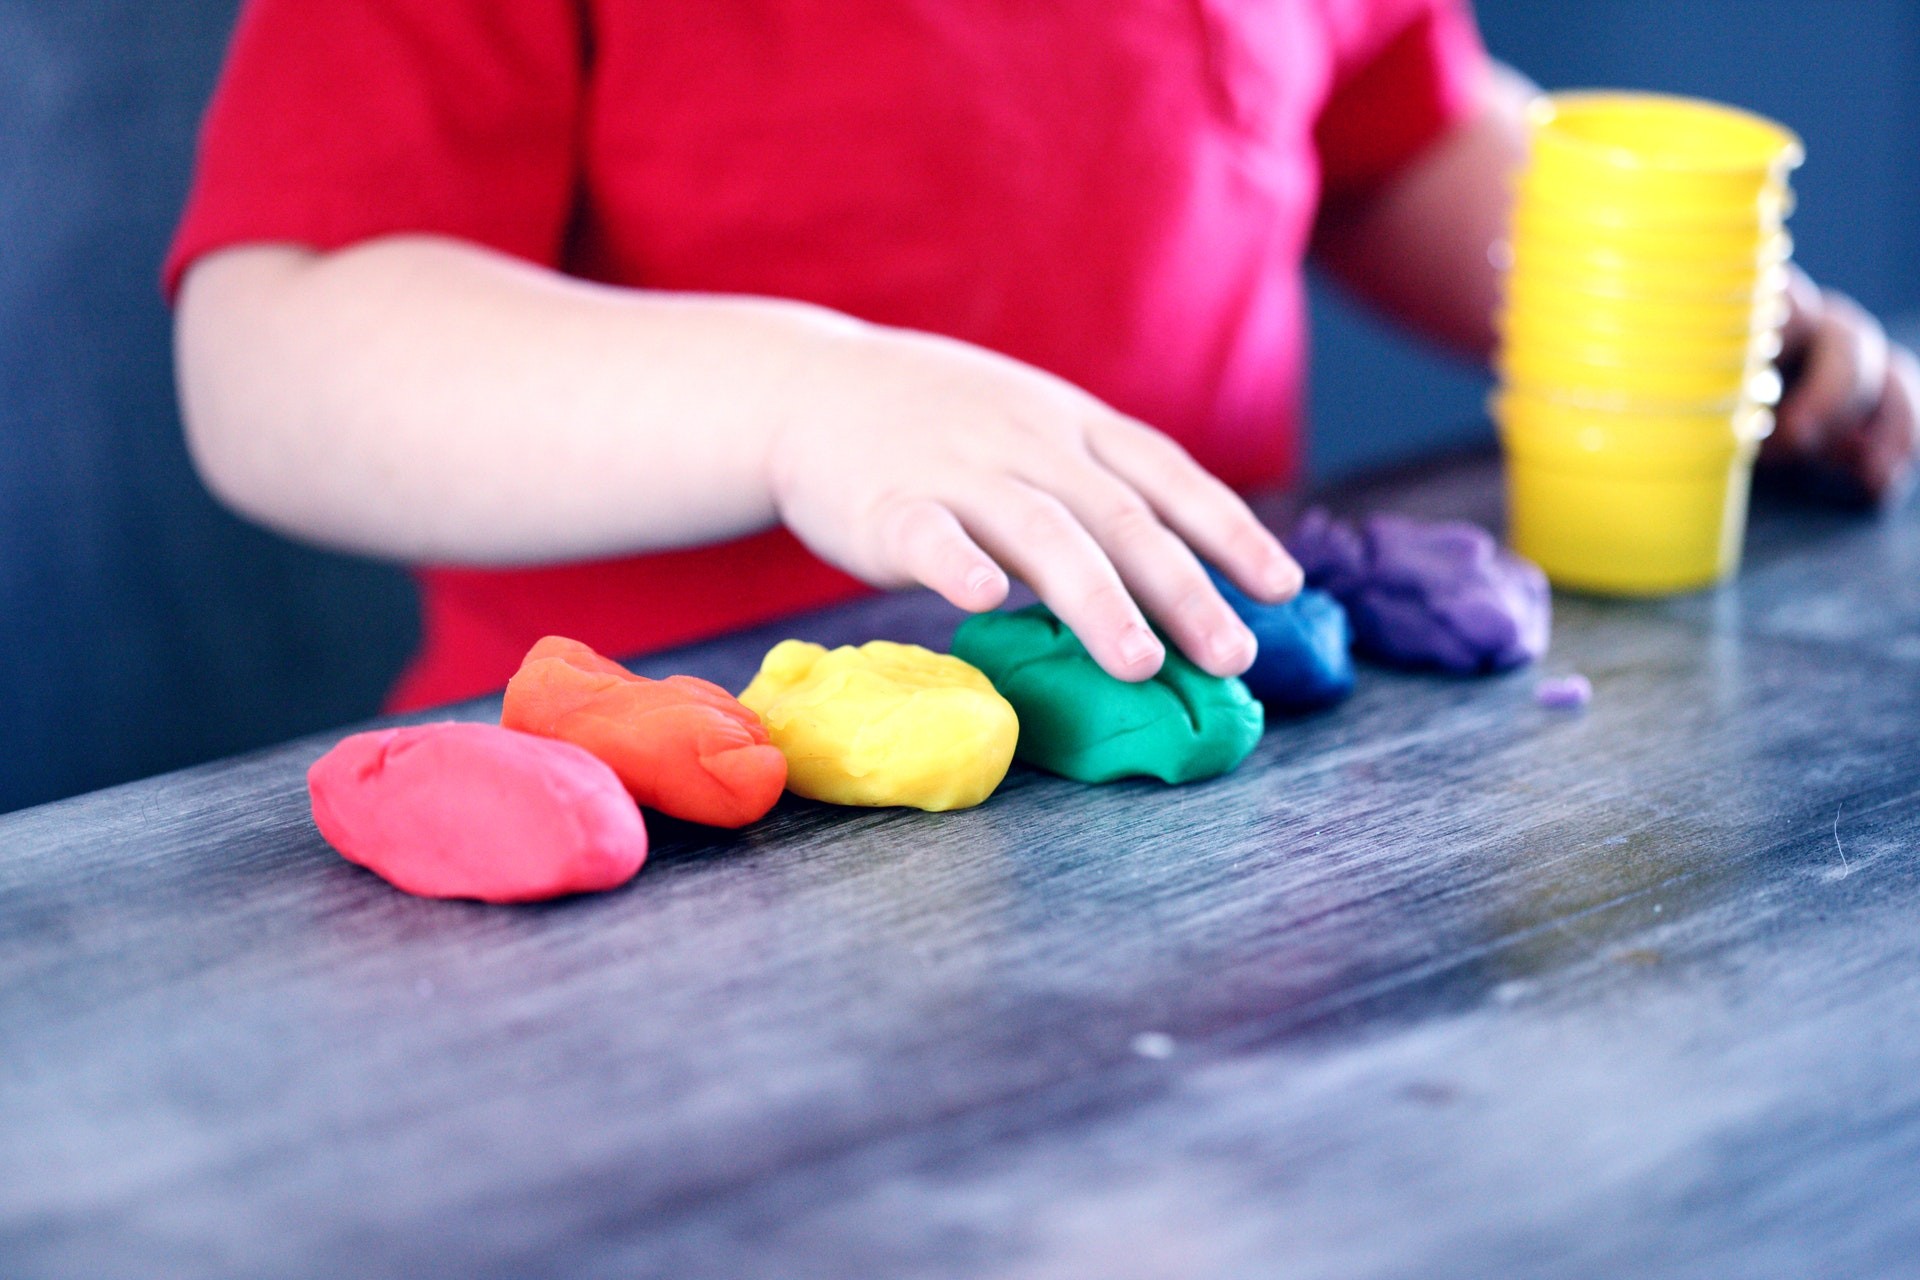 A young learner plays with playdough during geometry activities